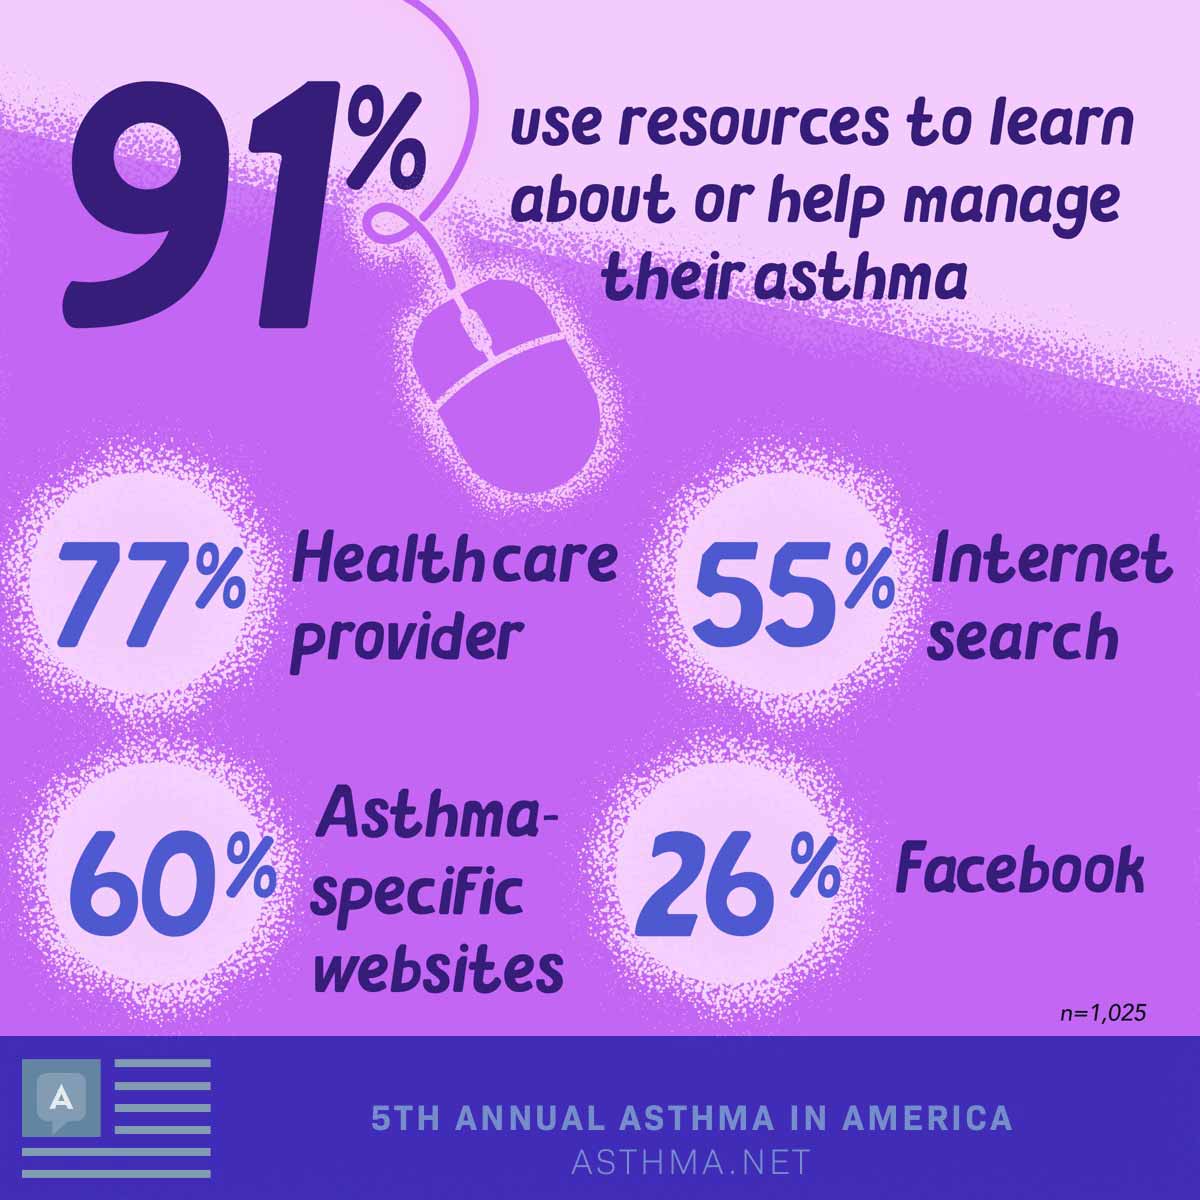 91% use resources to learn about or help manage their asthma Top resources include: 77% Health care provider 60% Asthma-specific websites 55% Internet search 26% Facebook